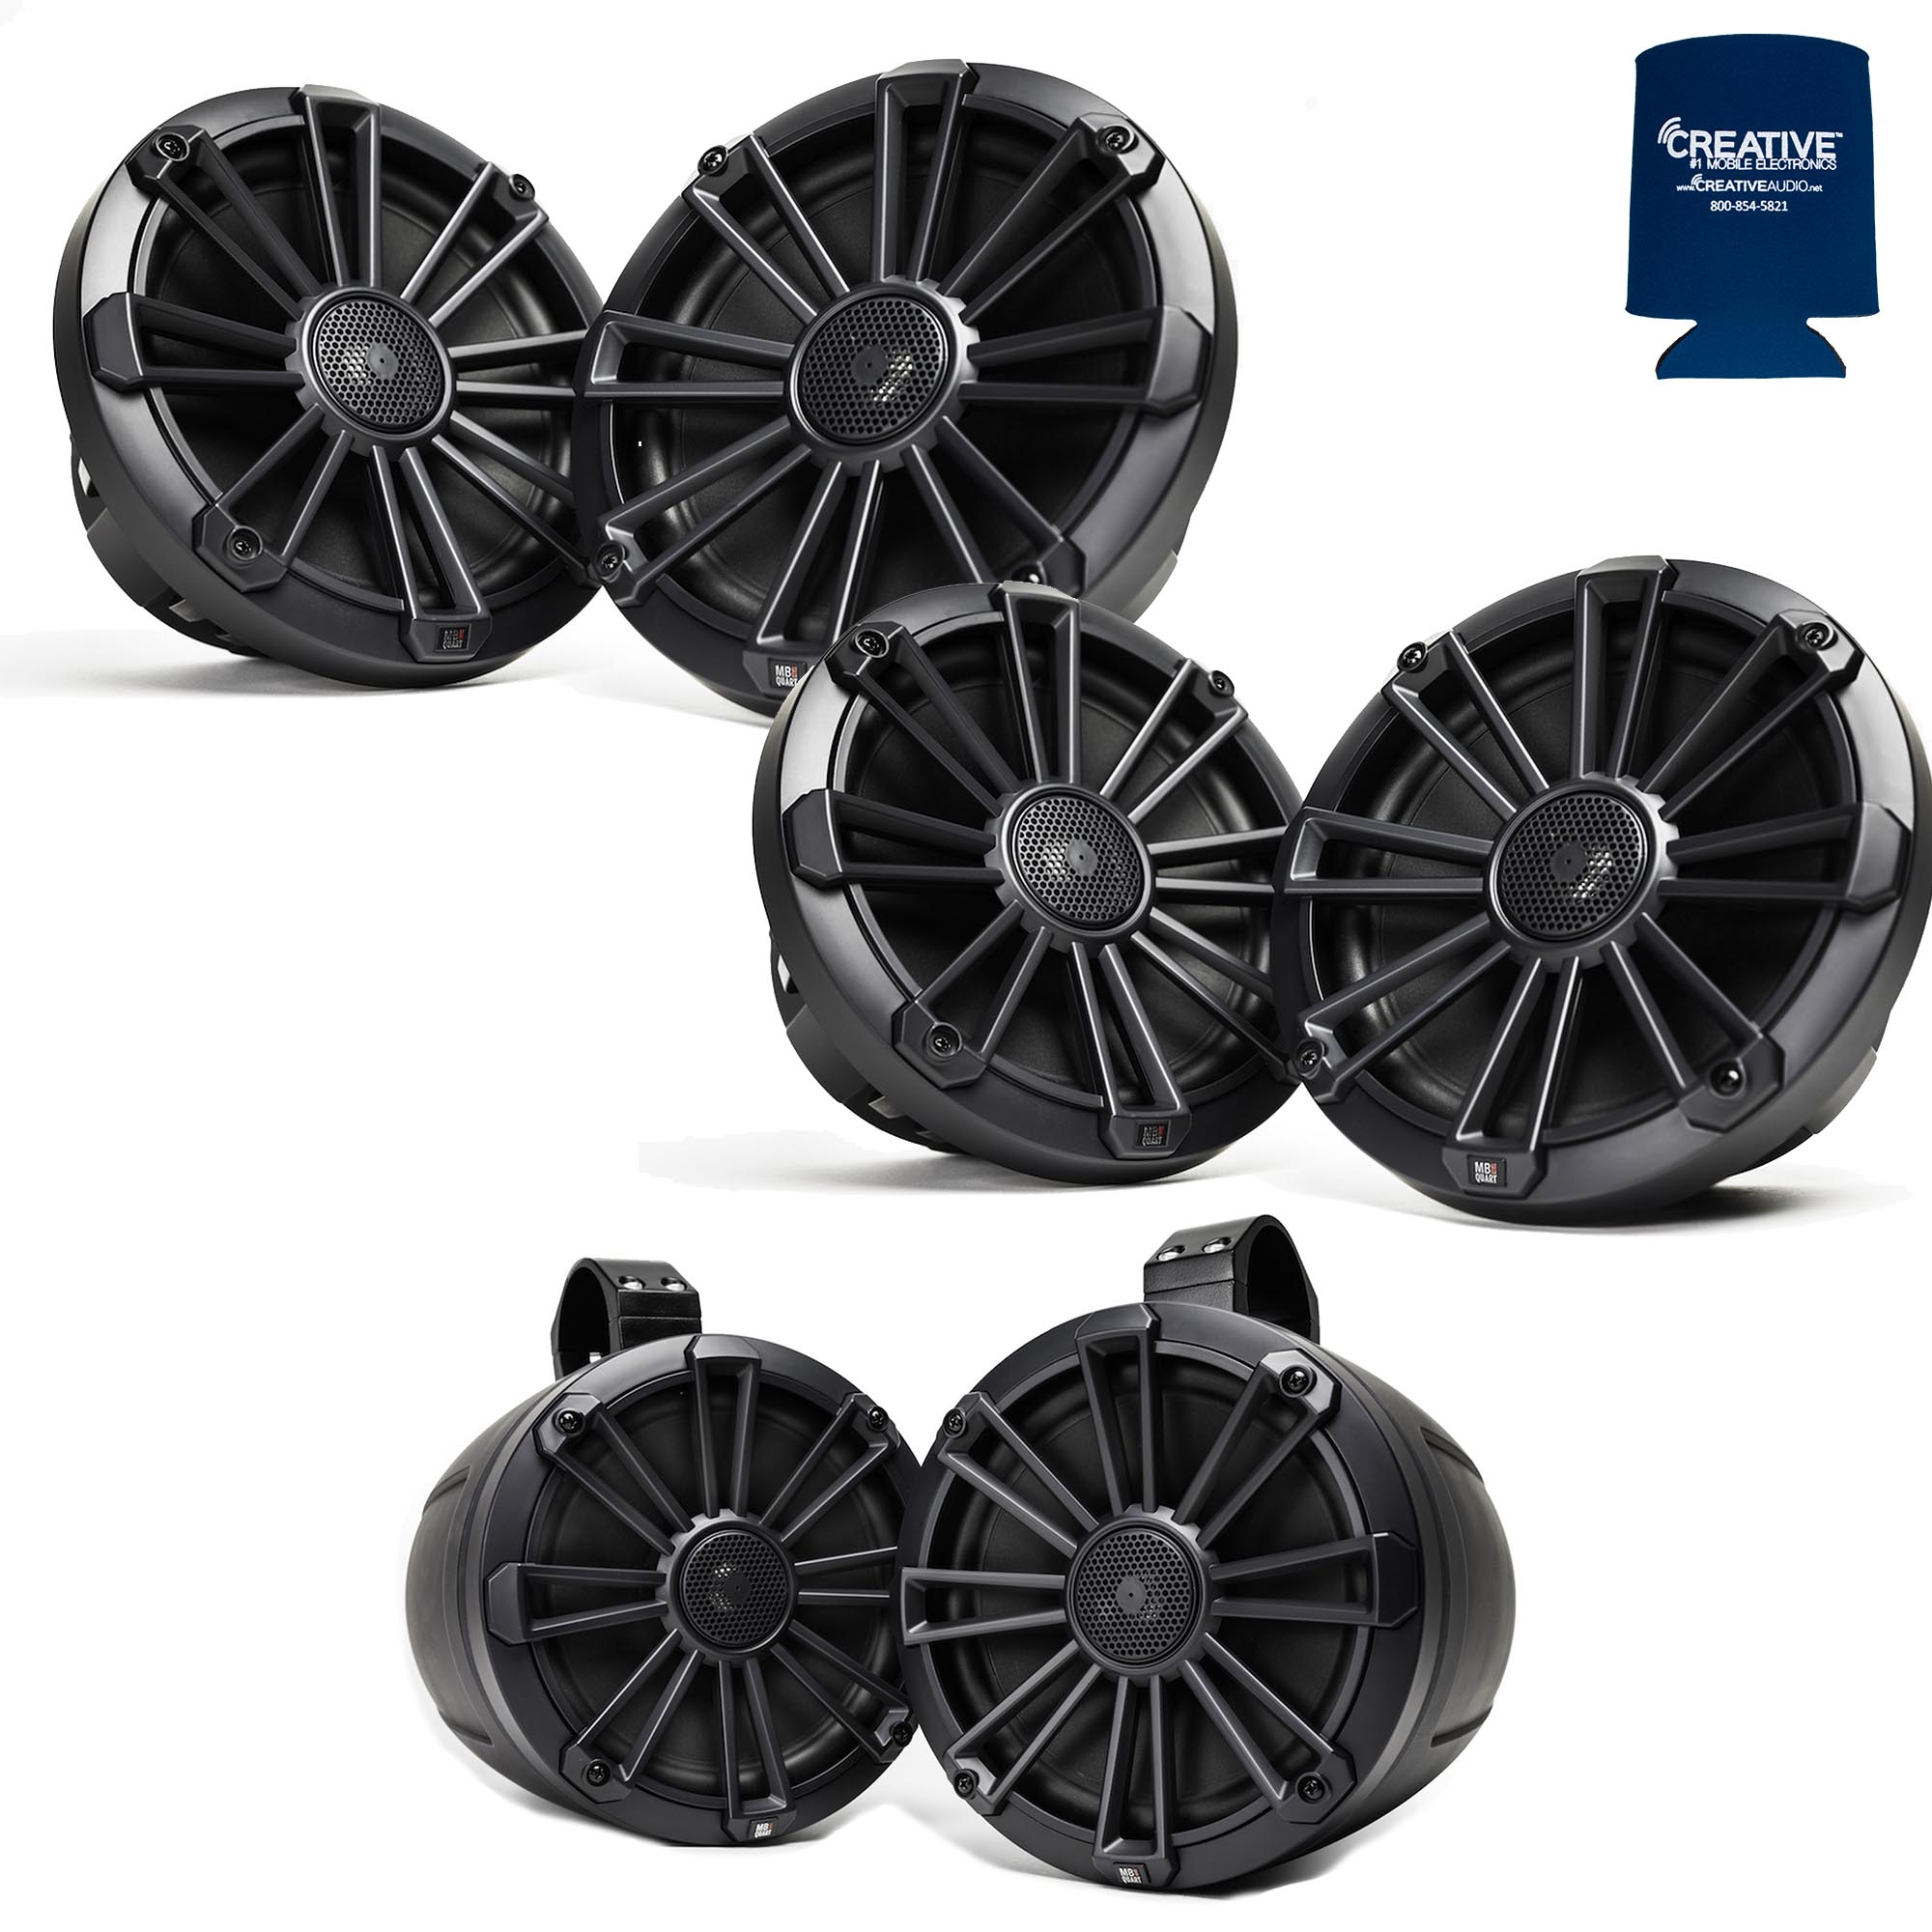 MB Quart Bundle- 2 Pair NP1-120 Premium Waterproof 8 Inch Marine Speakers with 1 Pair NPT1-120 8" Tower Speakers Premium Marine Speakers (Black Frame with Black, Silver and White Grills Included) - image 1 of 7